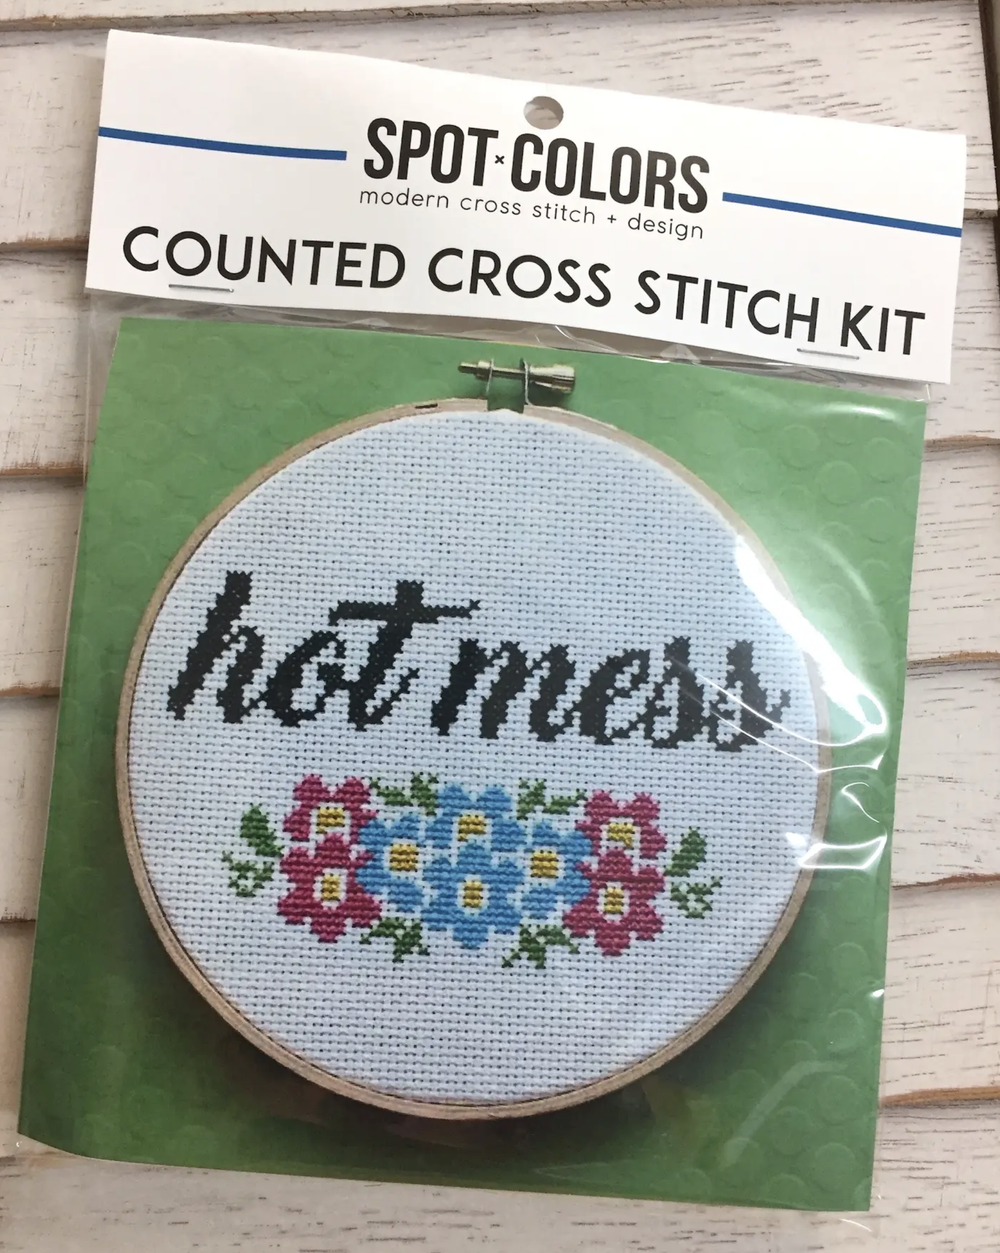  LWZAYS Cross Stitch Kits Counted Cross Stitch Kits 6 Pack  Stamped Cross-Stitch Needlepoint Counted Kits Beginners,Embroidery Kit Arts  and Crafts for Home Decor(11CT Cartoon) : Arts, Crafts & Sewing